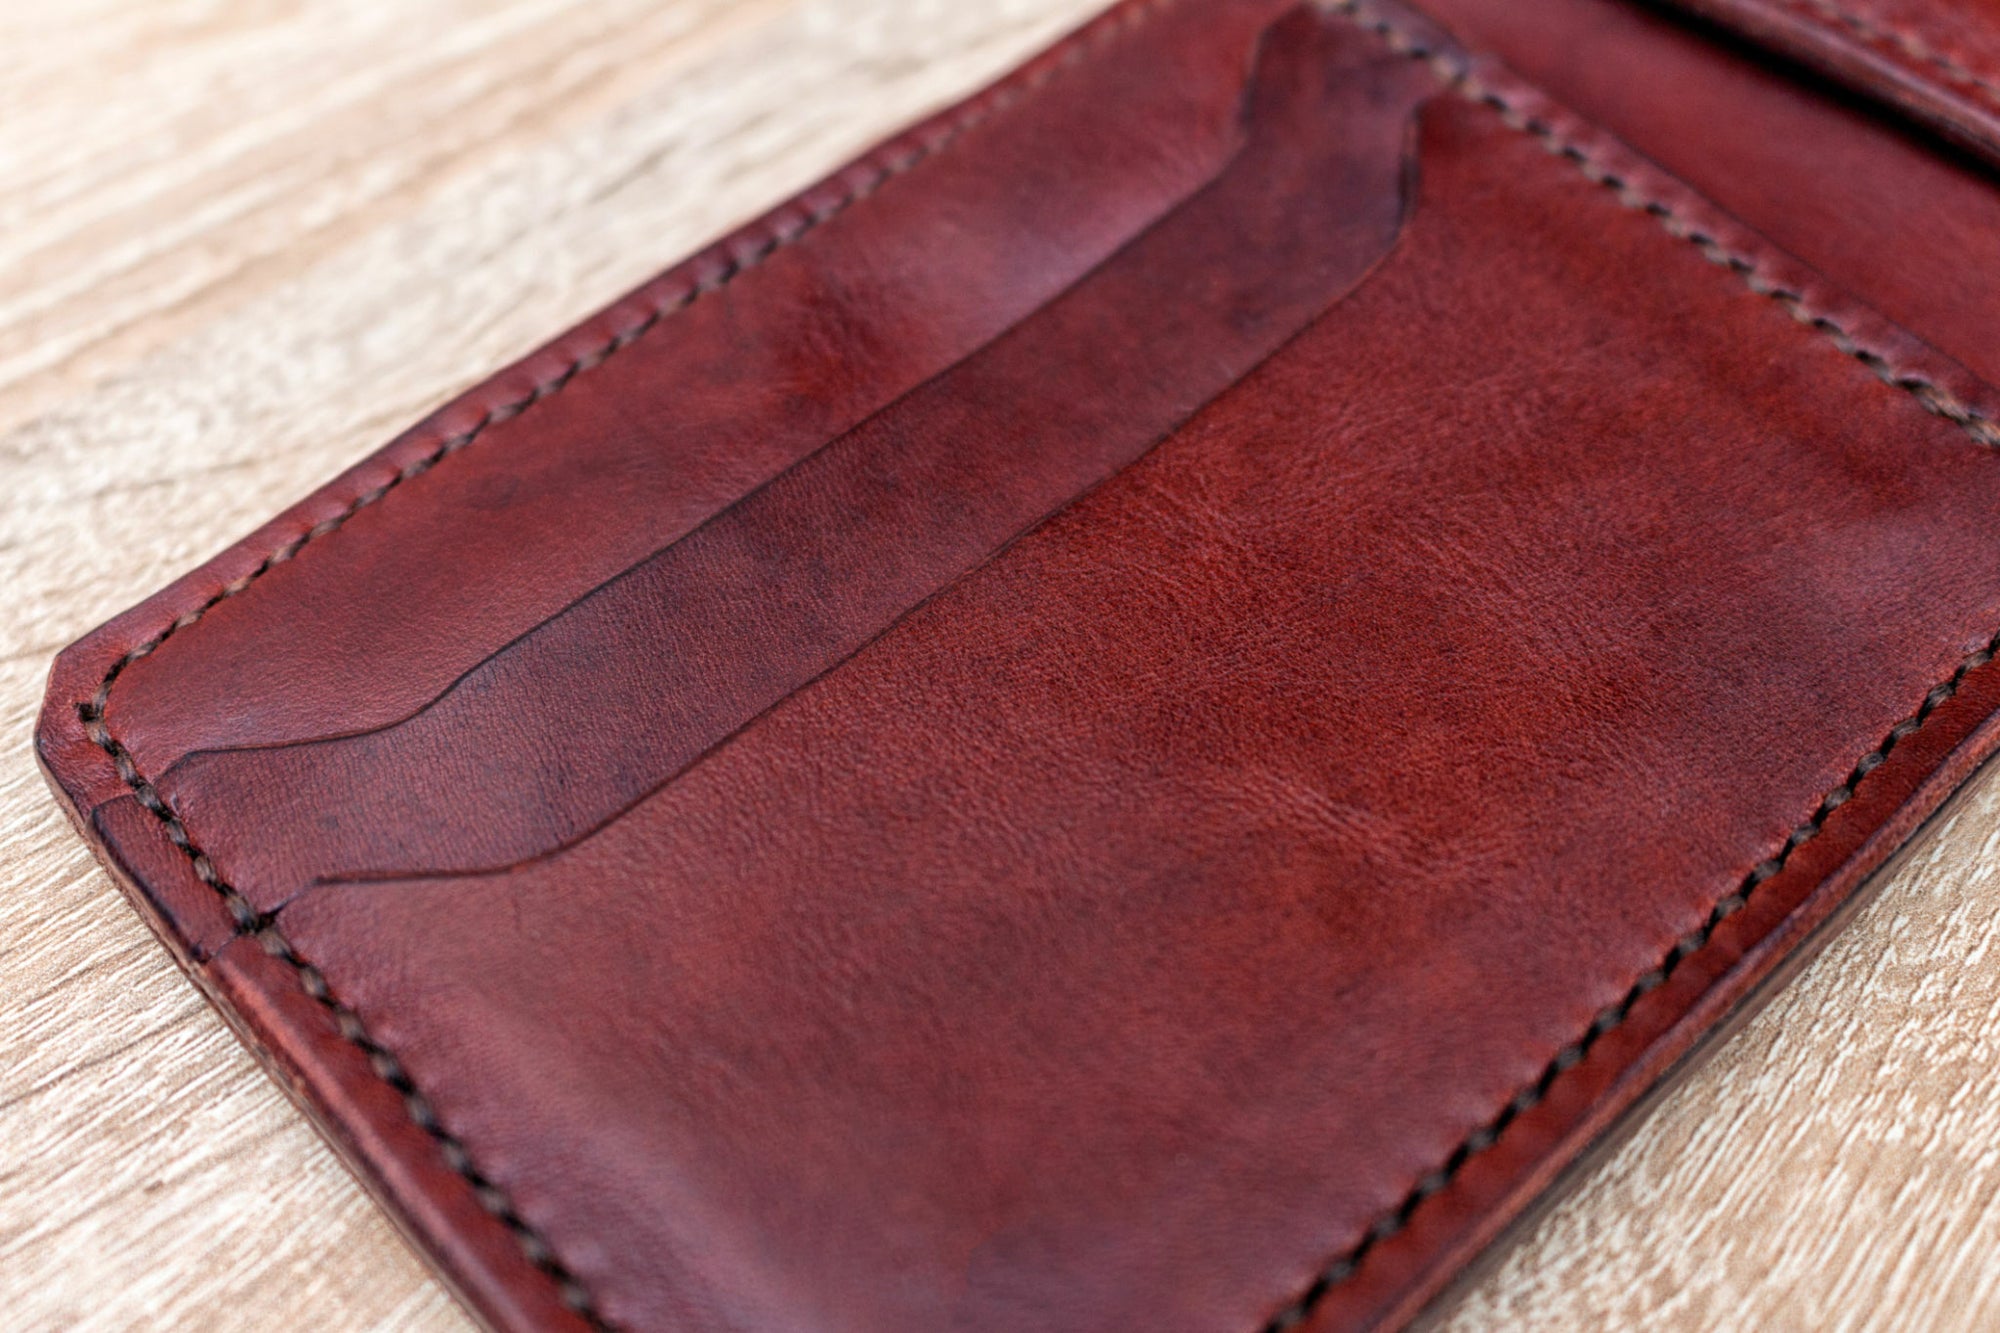 how to shrink leather wallet  